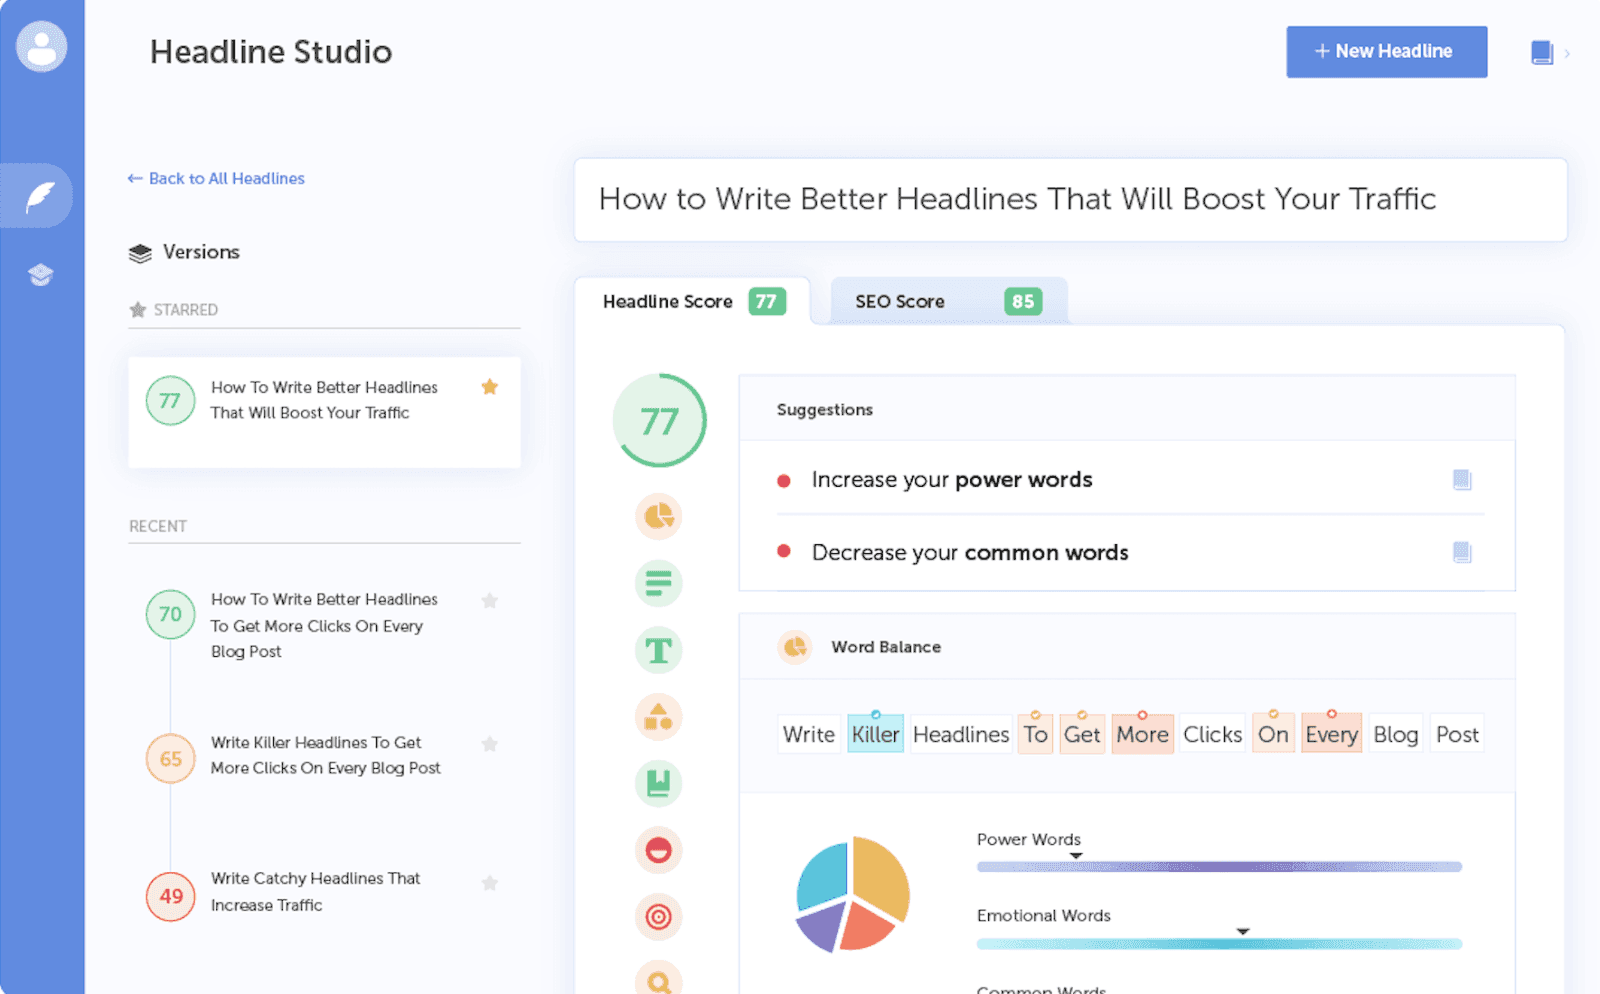 CoSchedule's Headline studio is a tool that allows the user to test headlines to see what will yield the best results